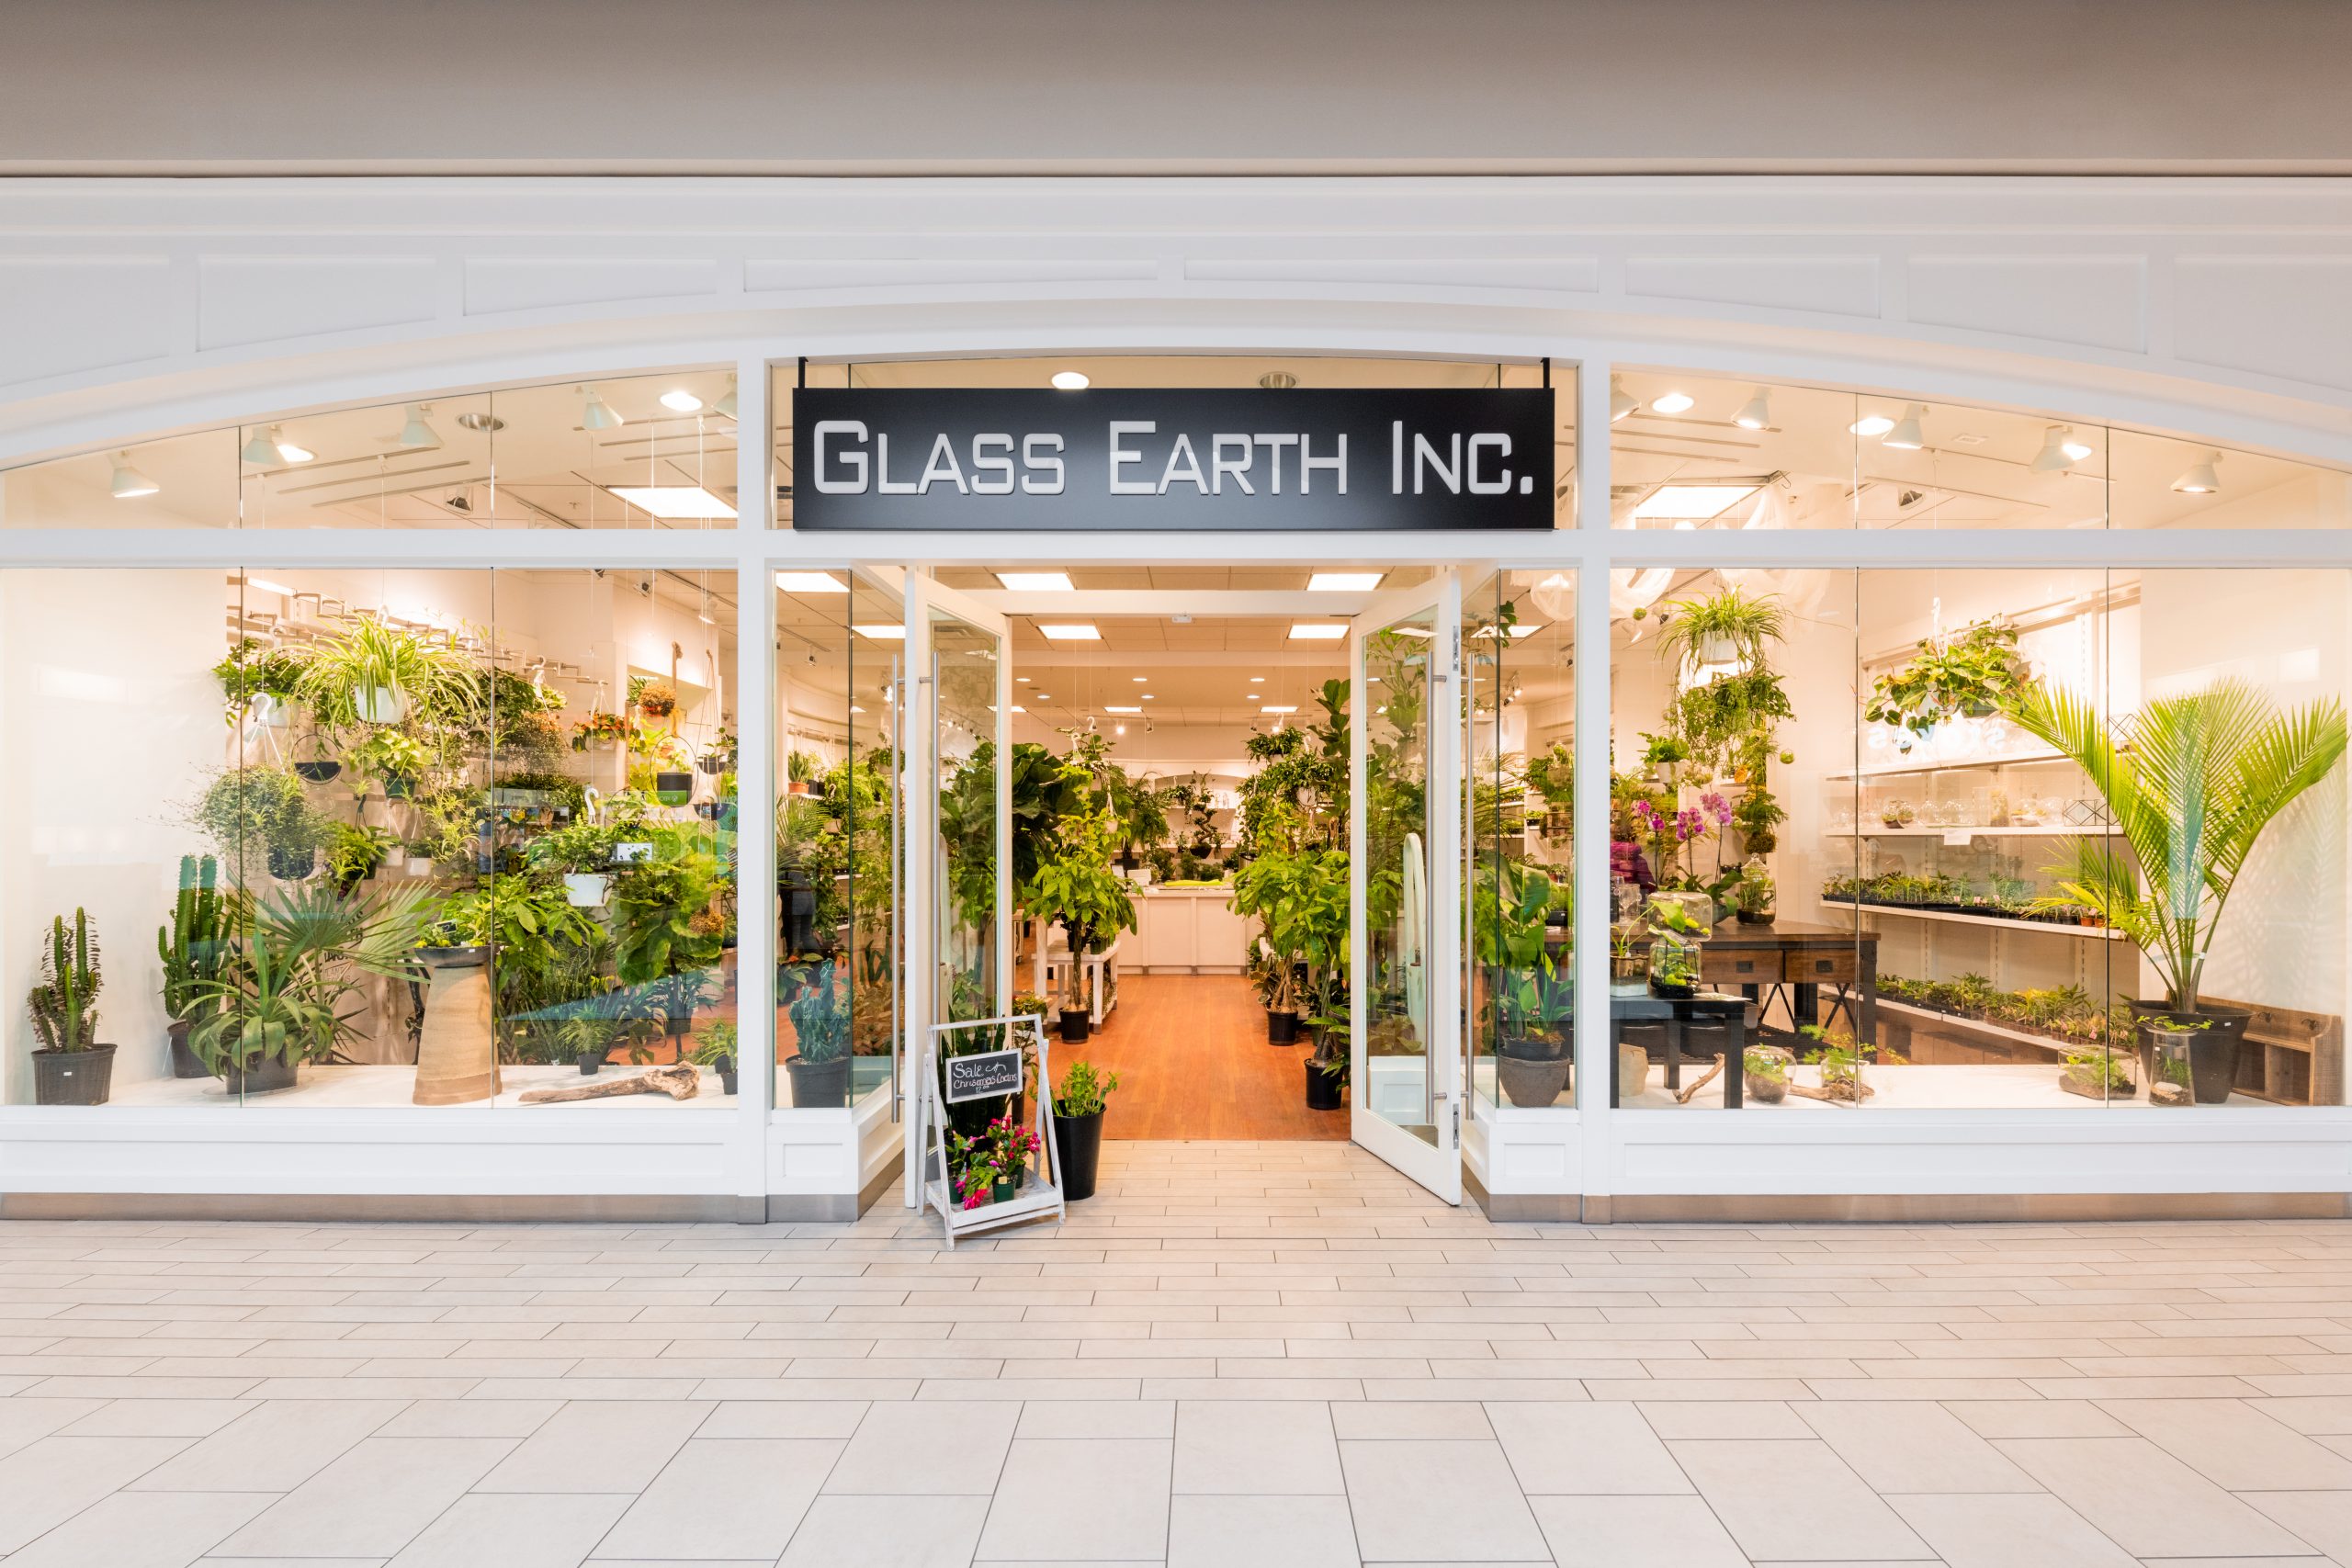 Outside view of Glass Earth Inc.